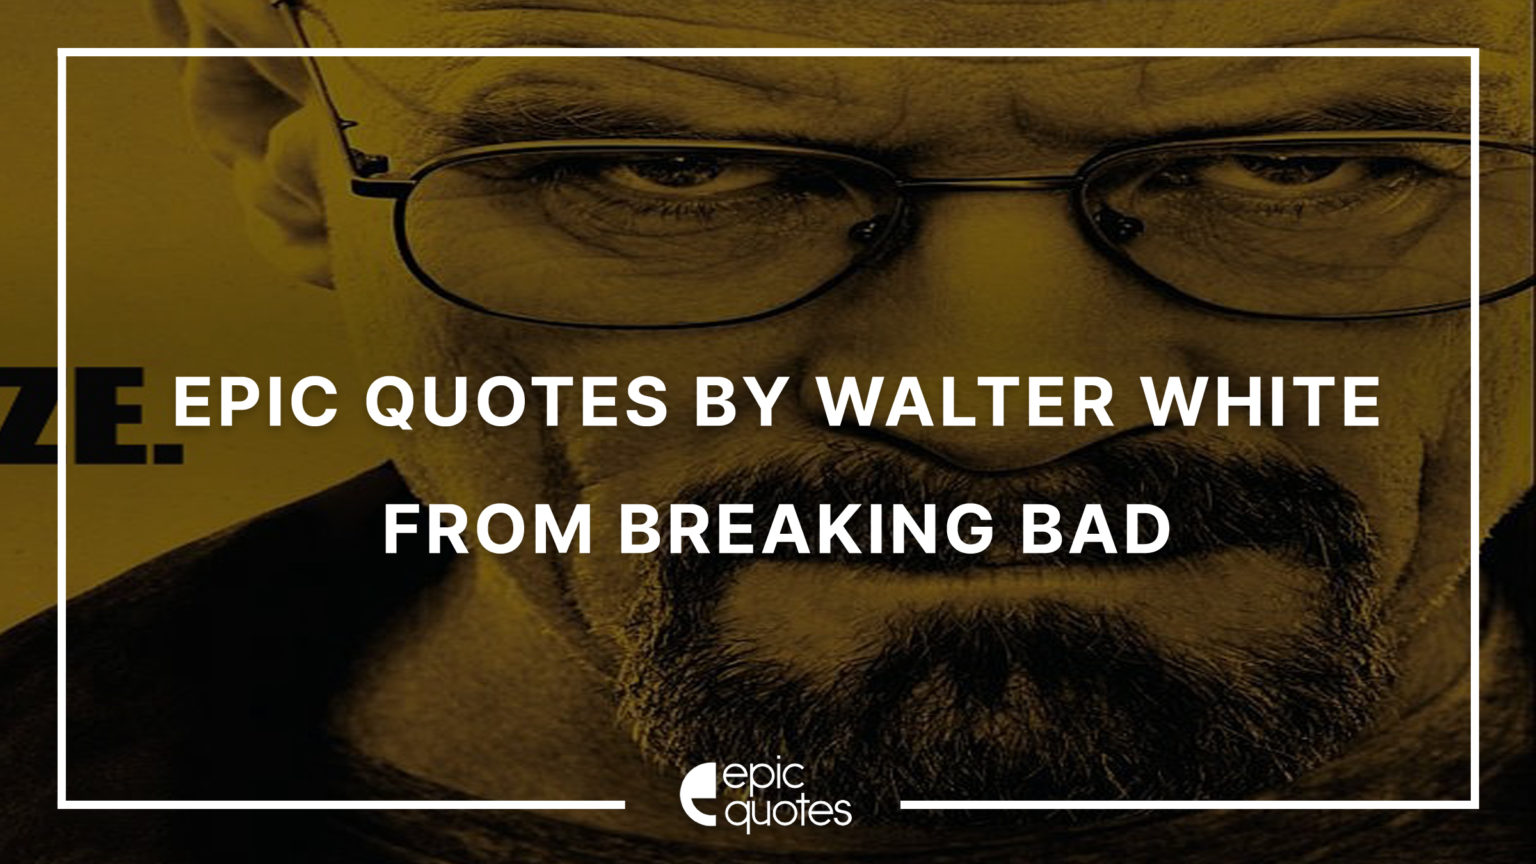 Epic Quotes By Walter White from Breaking Bad